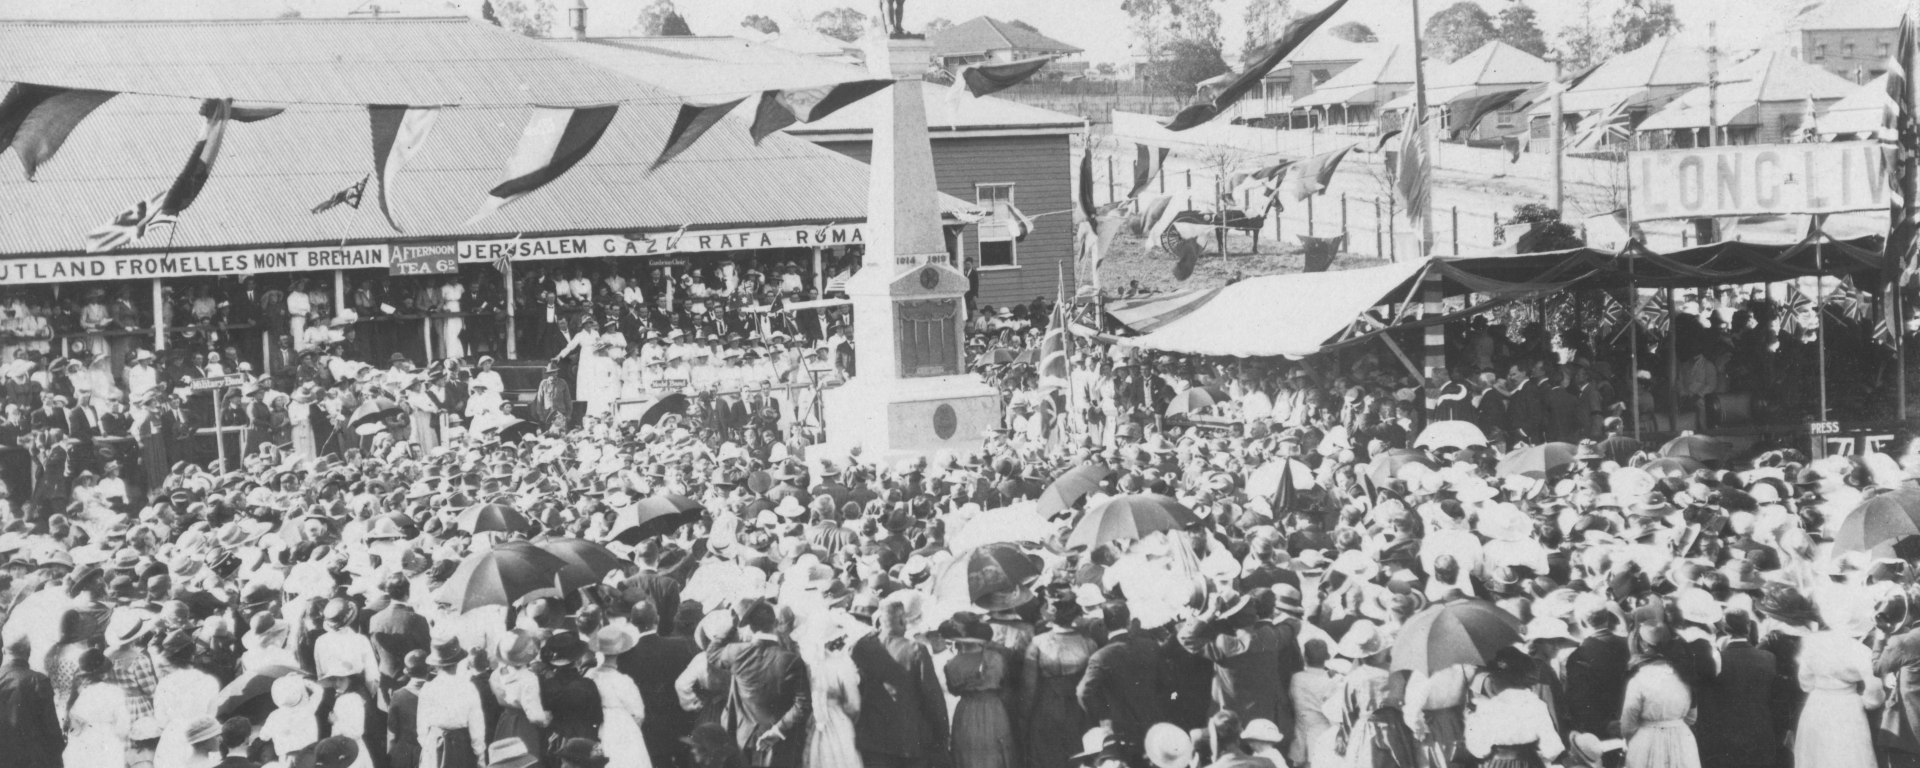 Unveiling Ceremony of the Memorial at the Ipswich Railway Workshops, September 1919.